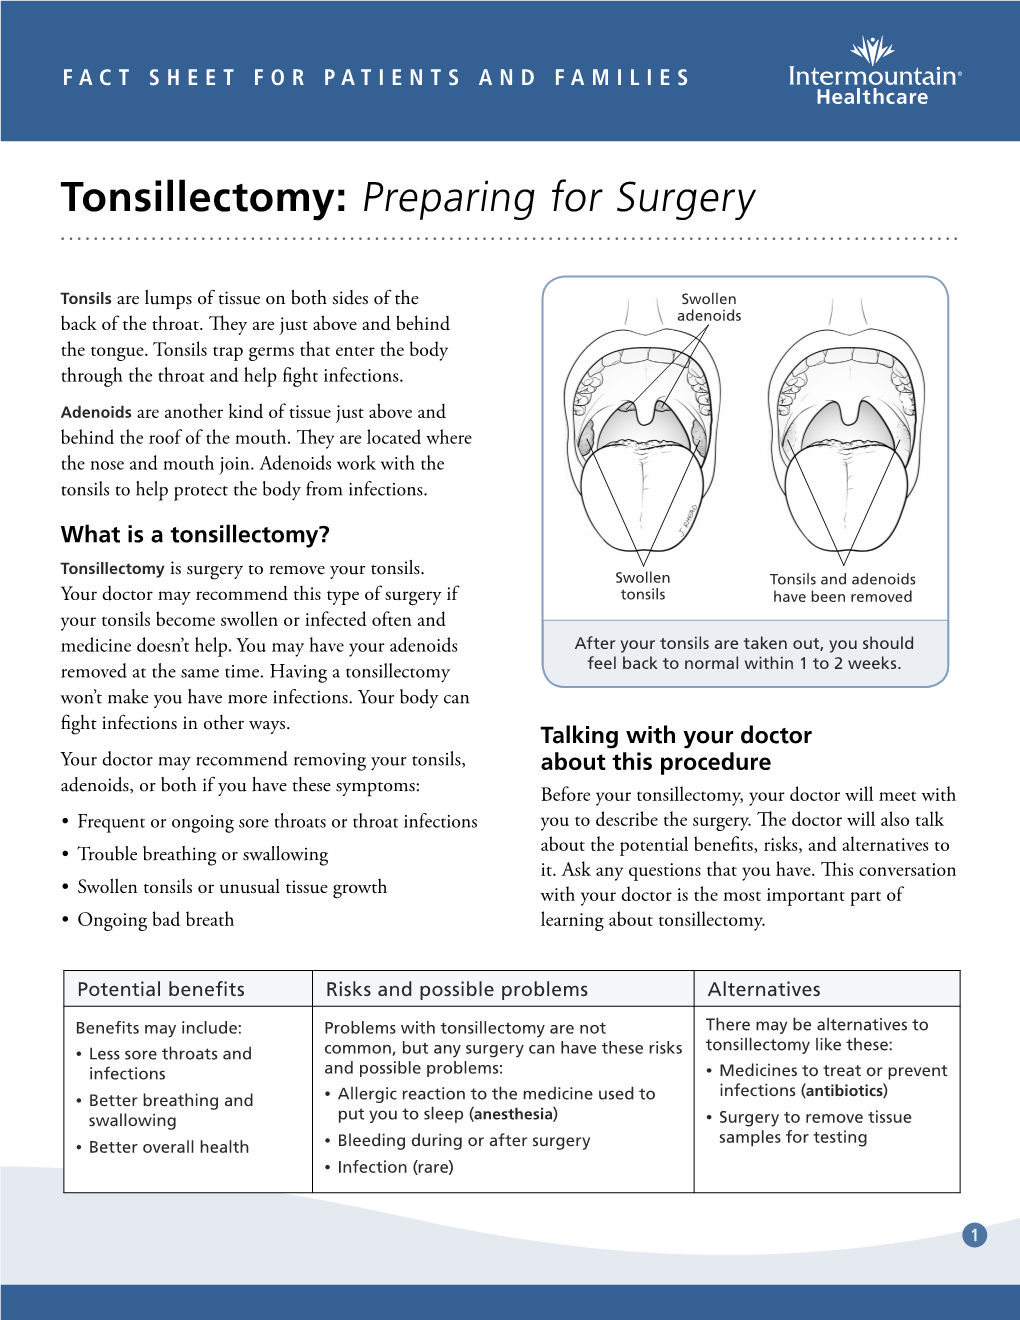 Tonsillectomy Preparing for Surgery Fact Sheet